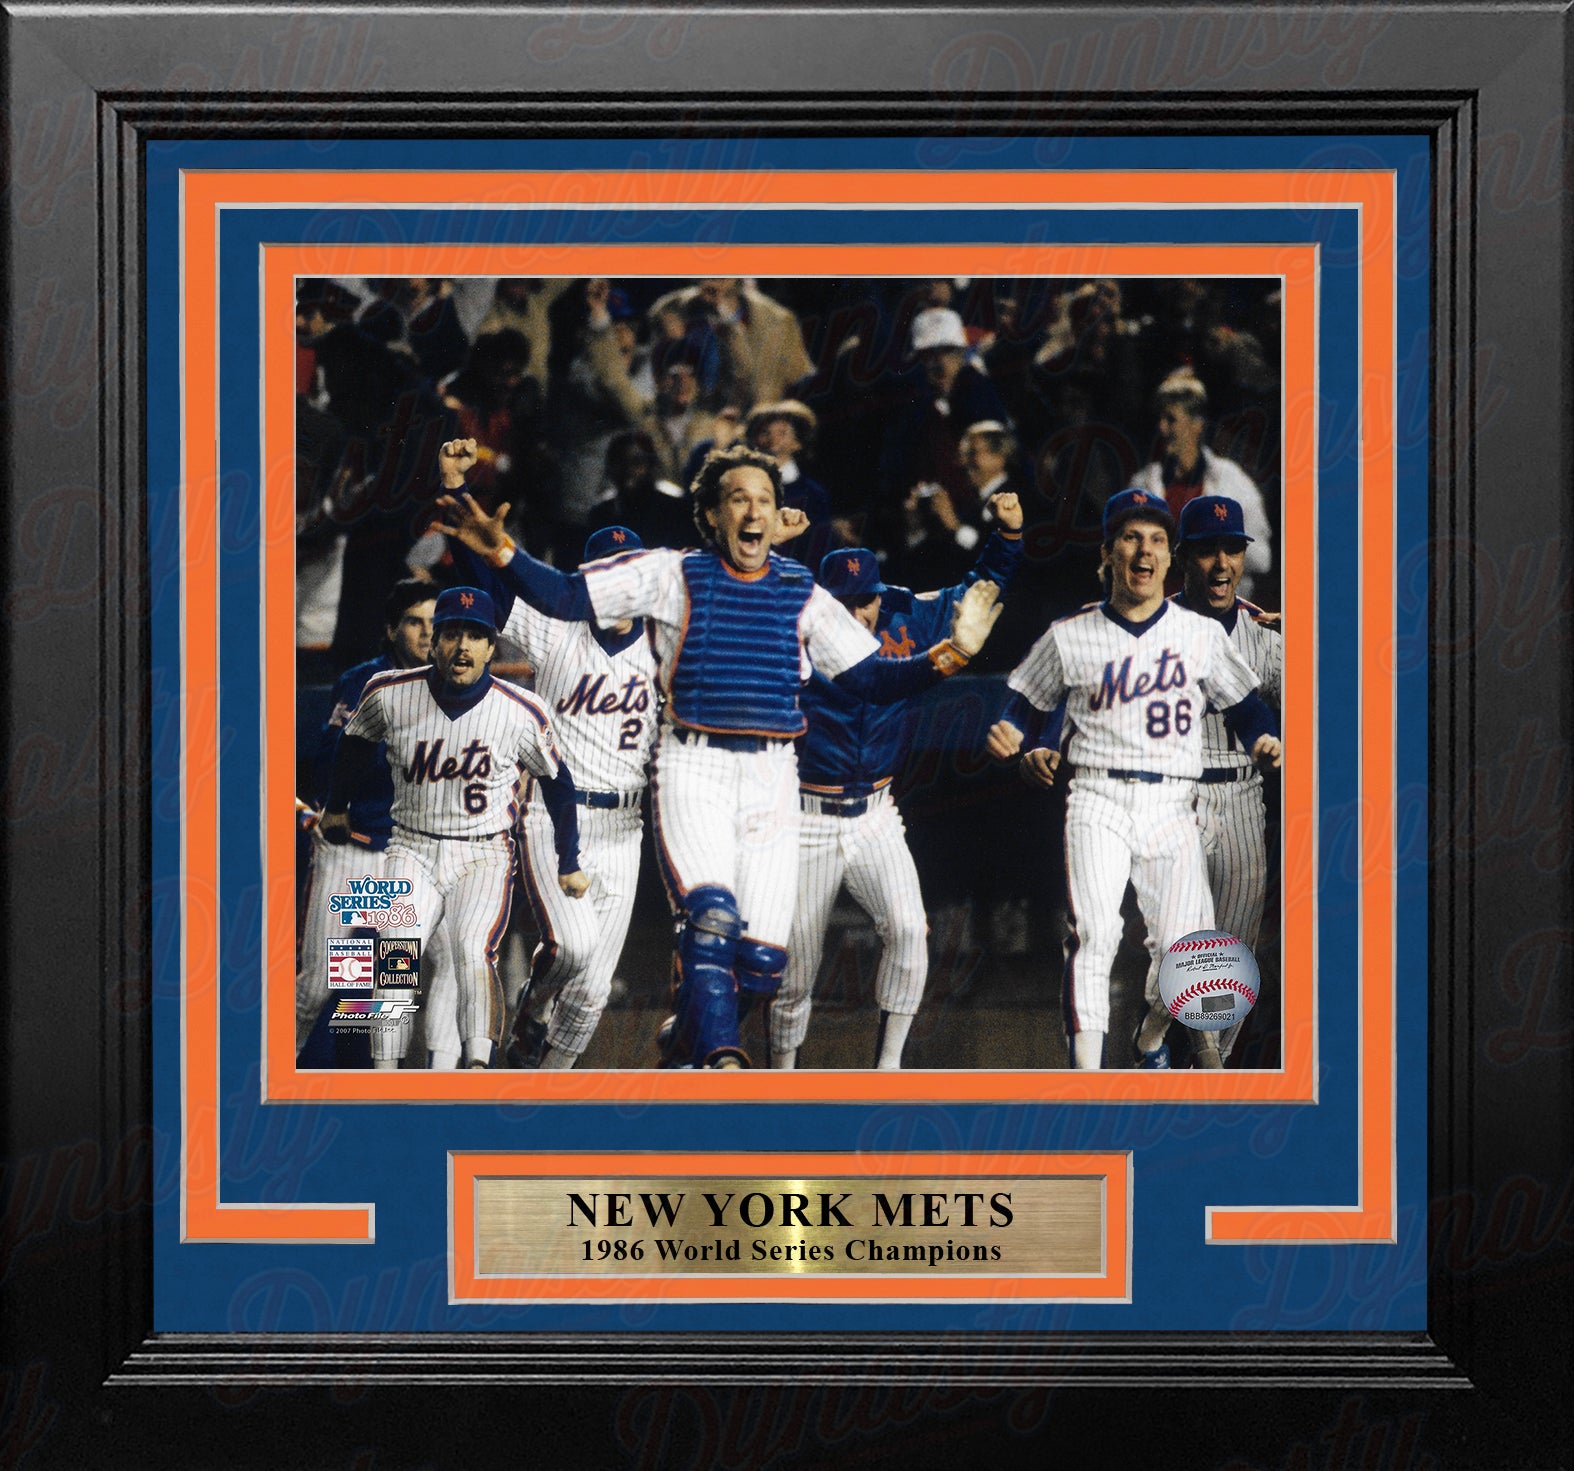 Gary Carter 1986 World Series New York Mets 8 x 10 Framed Baseball Photo  with Engraved Autograph